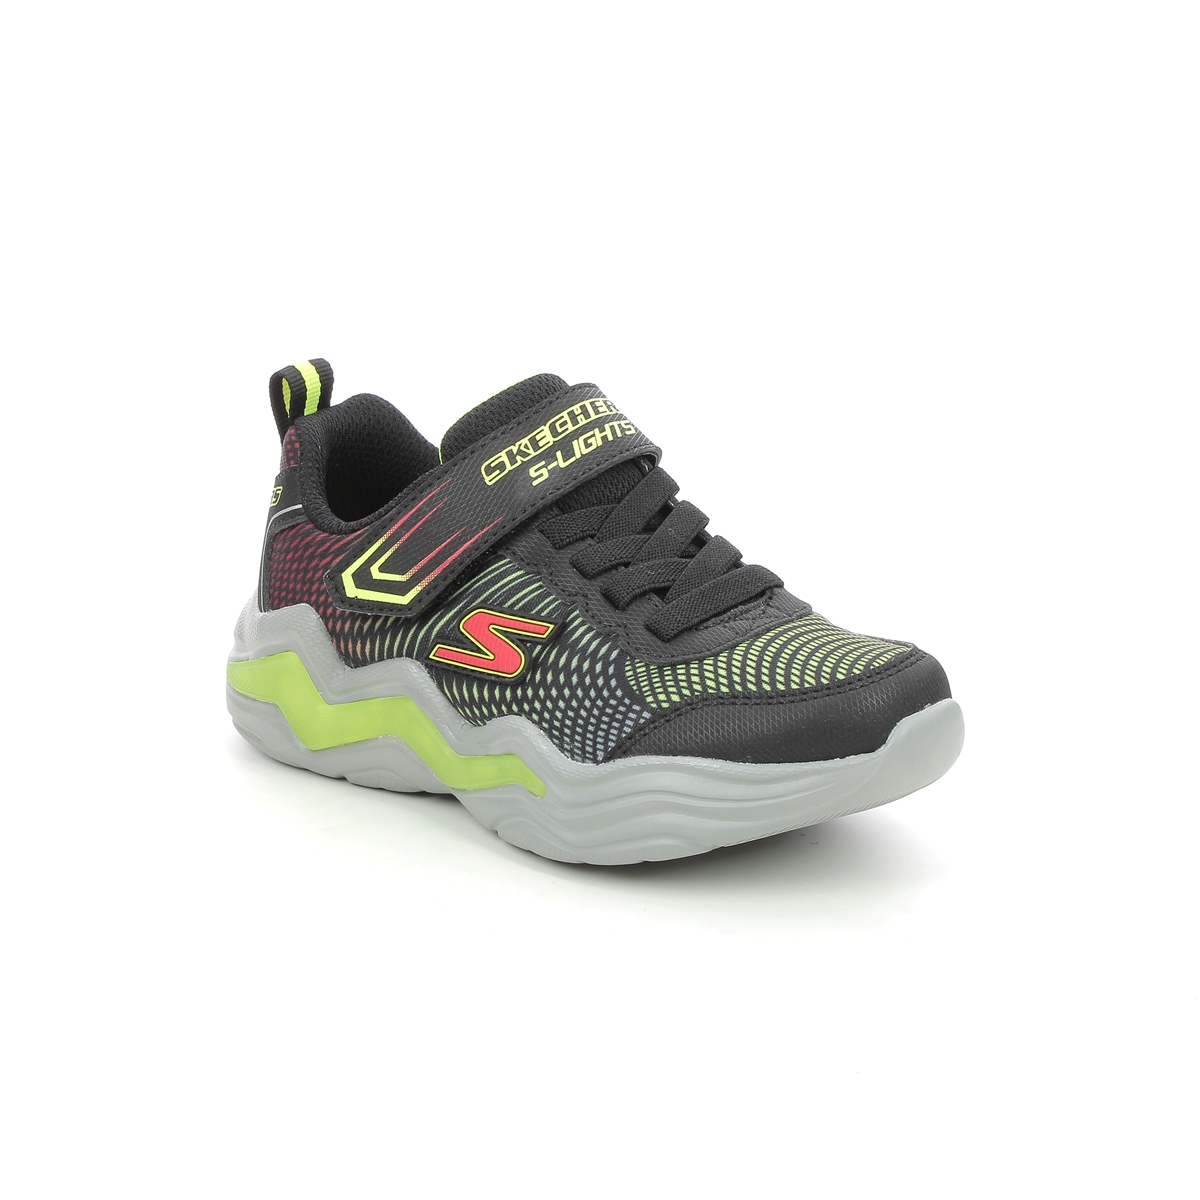 Skechers Erupters 4 BKLM Black Lime Kids trainers 400125L in a Plain Textile in Size 27